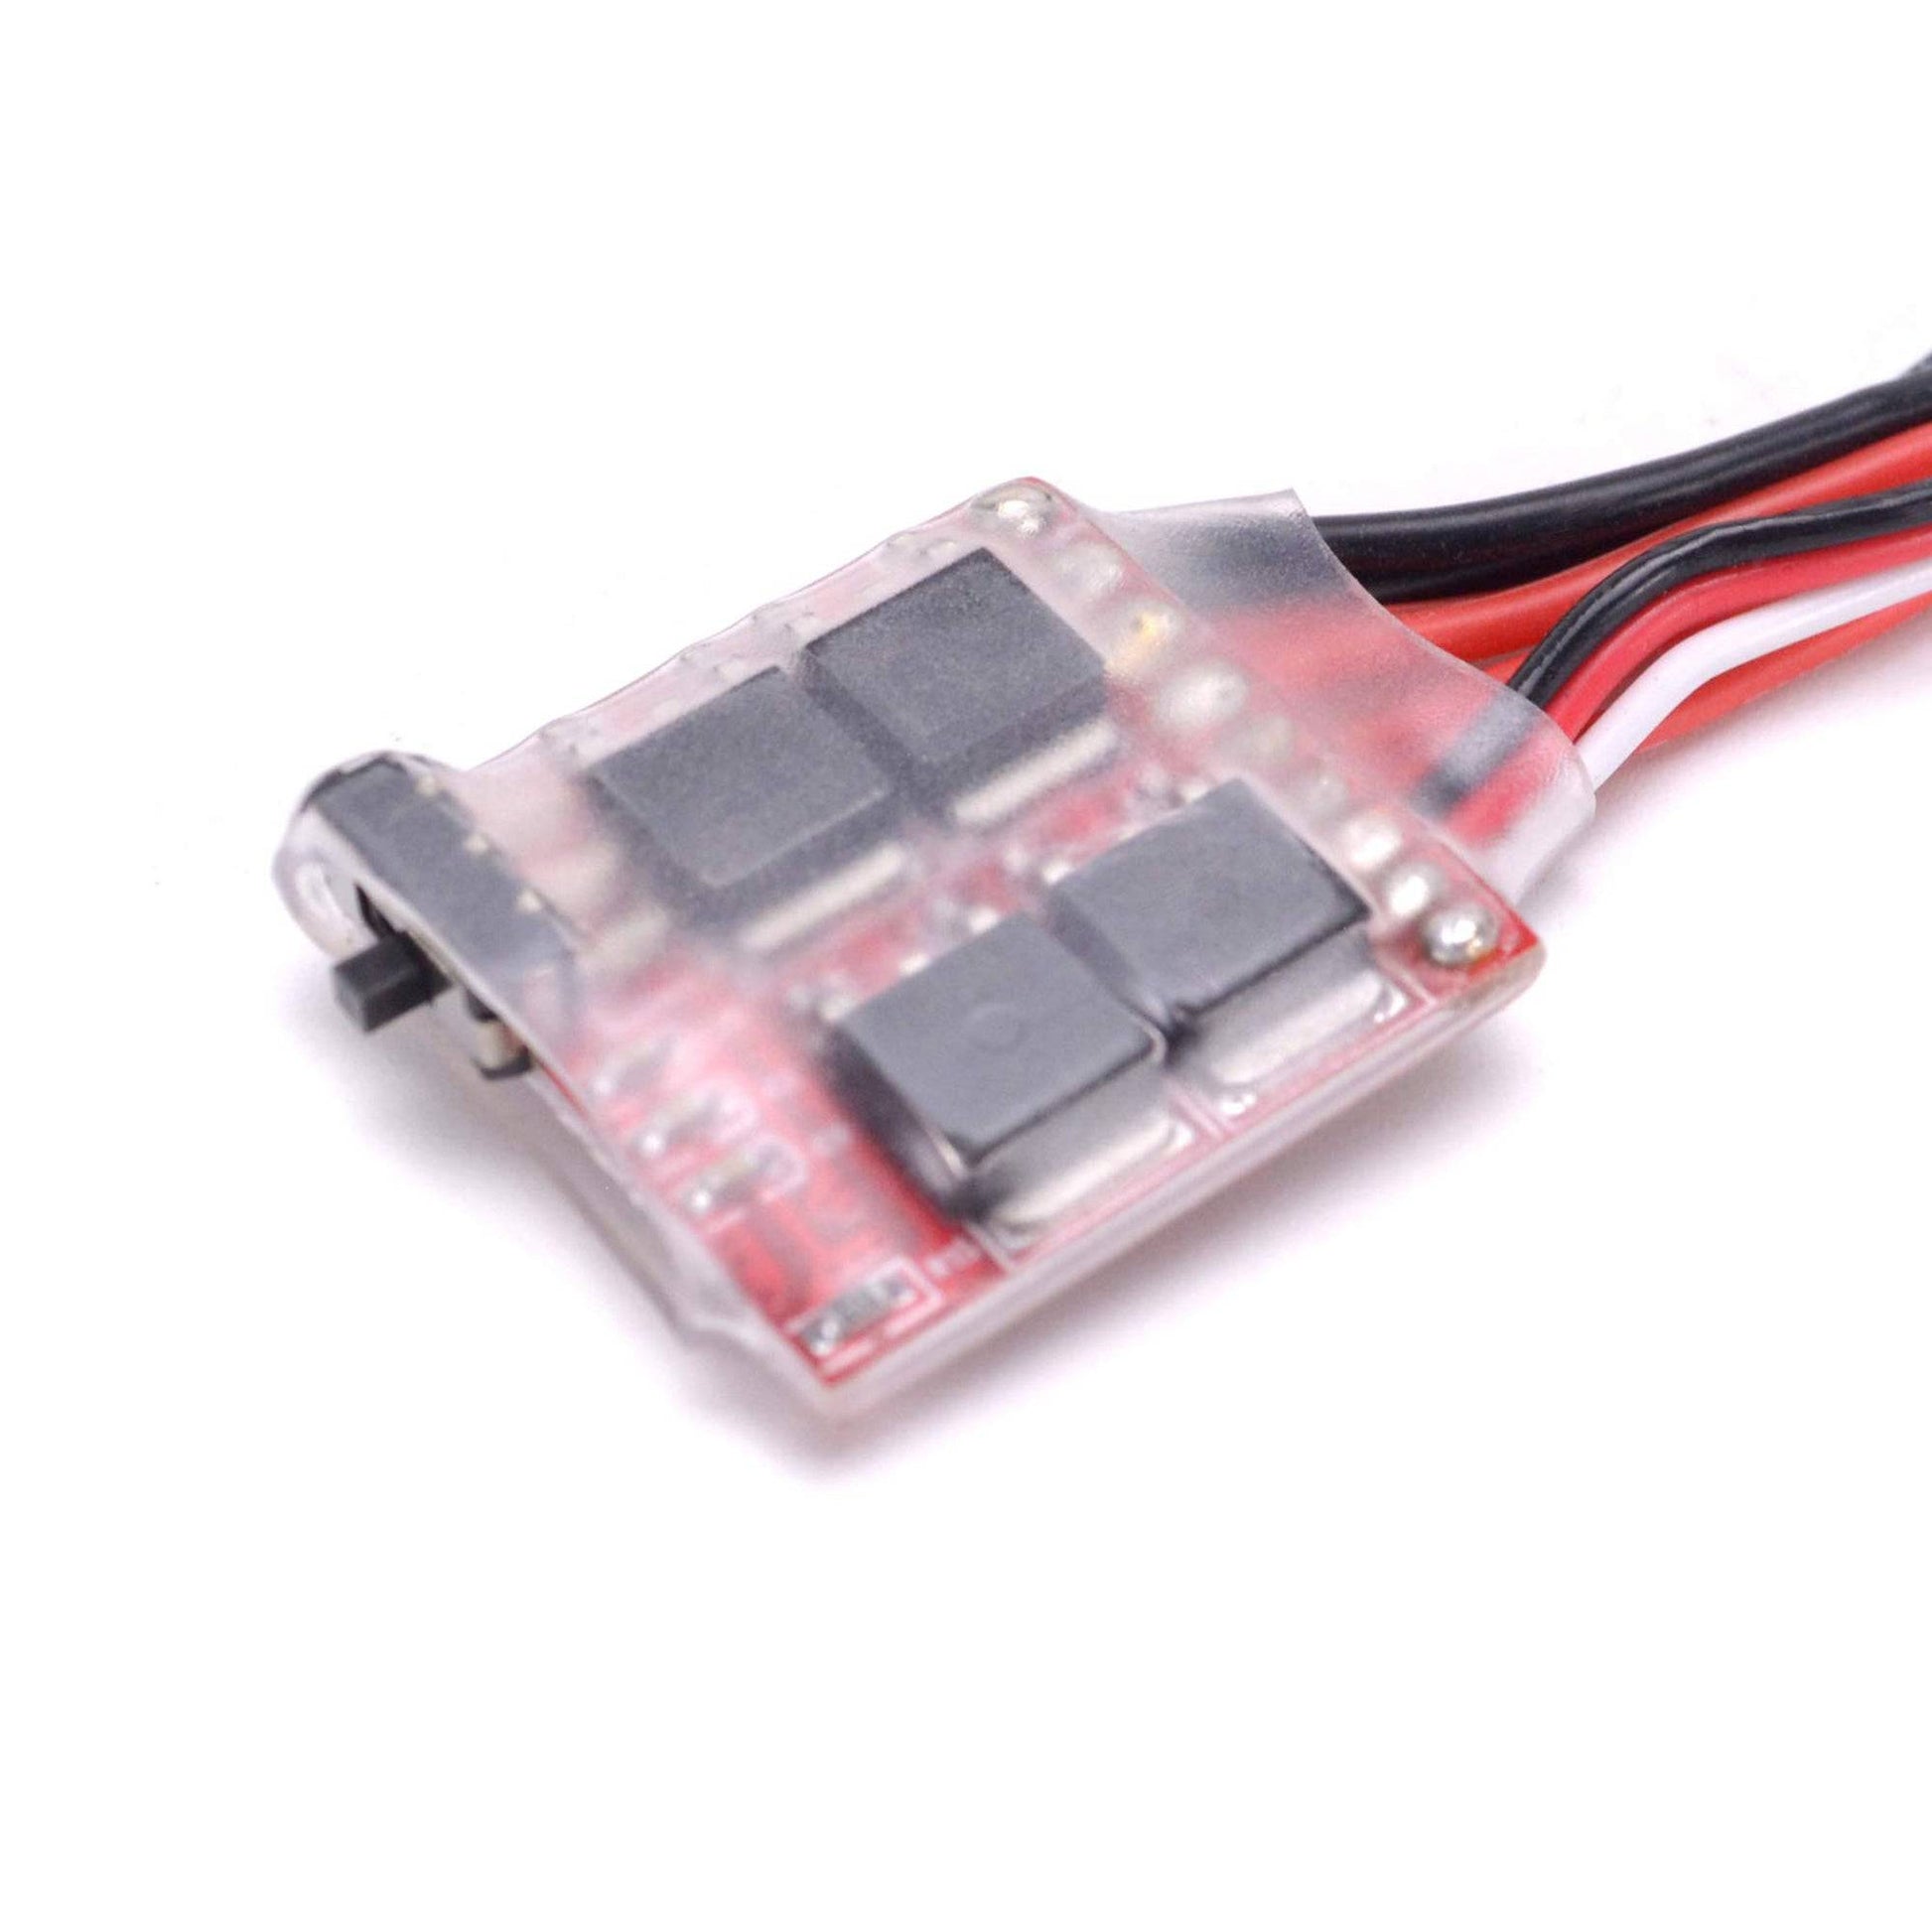 20A Brush ESC 20A Brushed Electronic Speed Controller w/Brake for RC Car Boat Tank - RS3005 - REES52